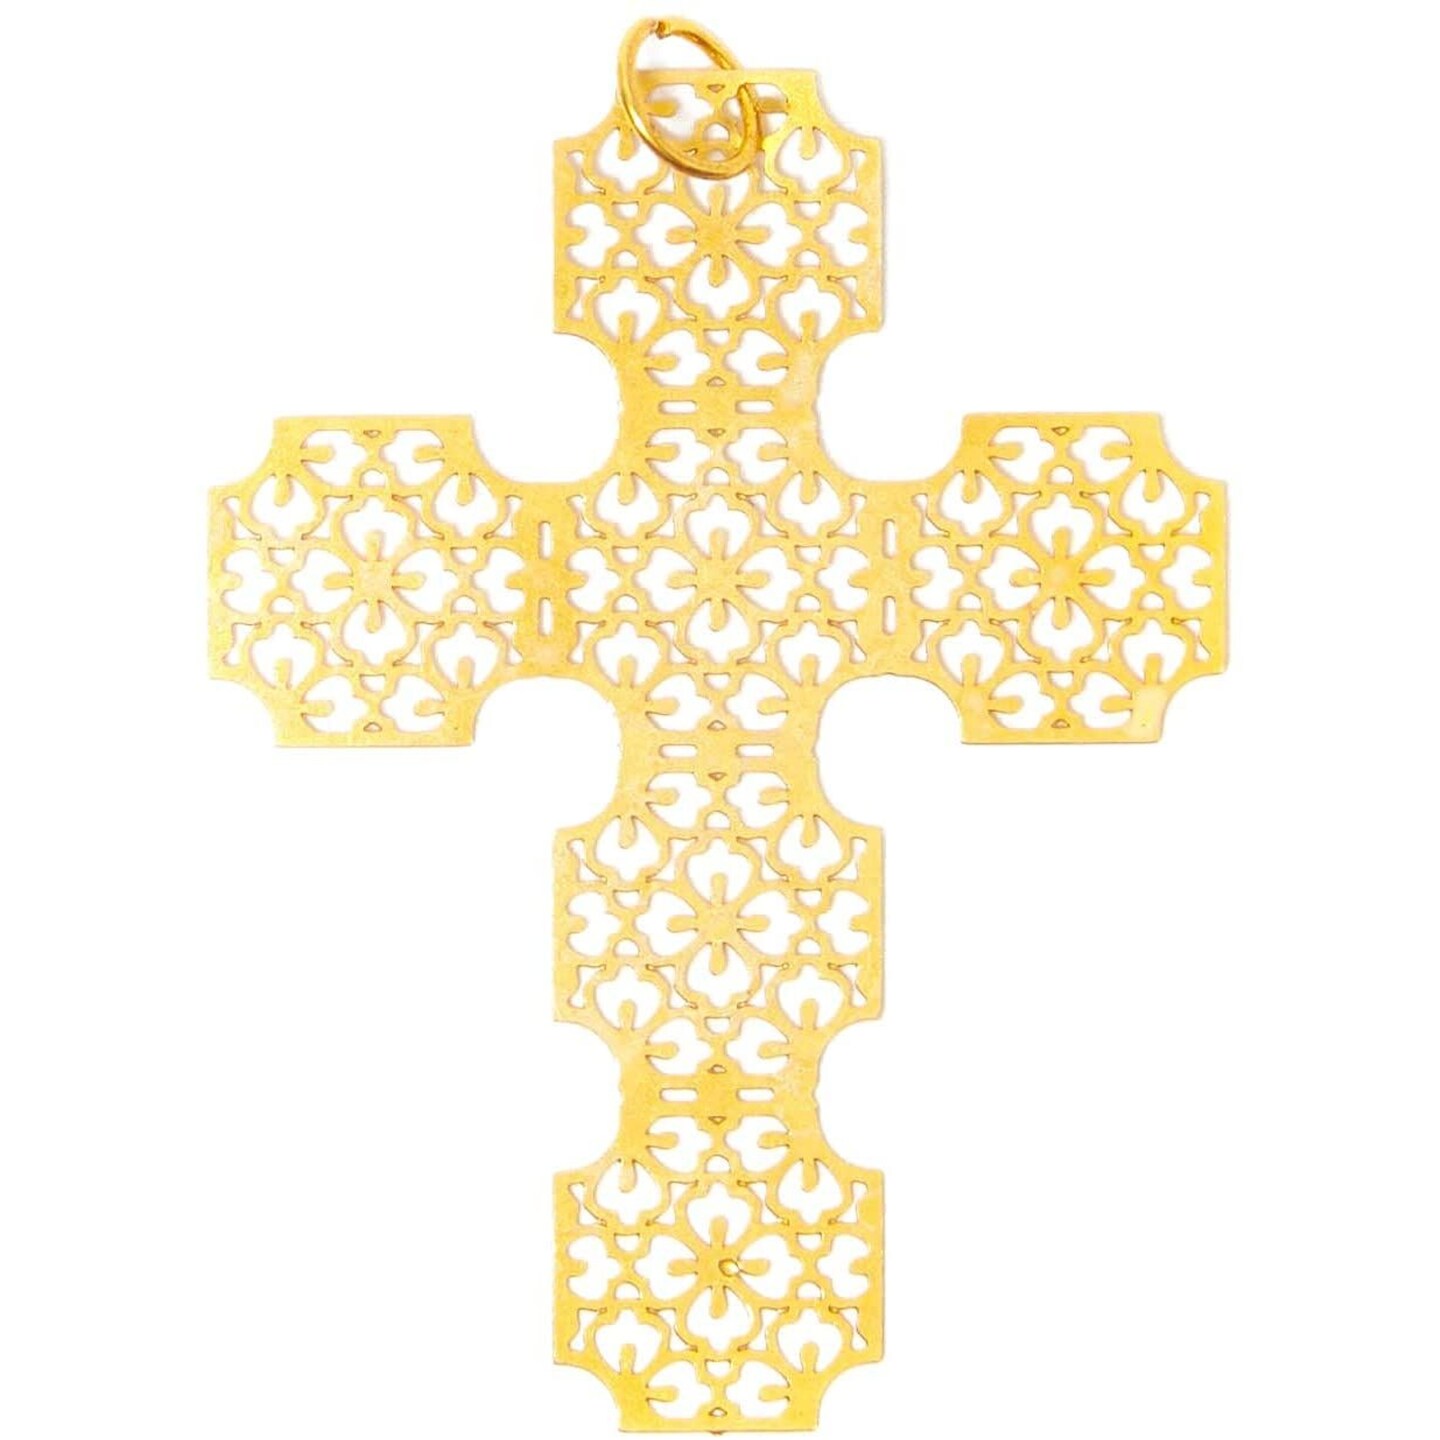 Gold Charms for Jewelry Making, Cross Pendants (24 Pack)